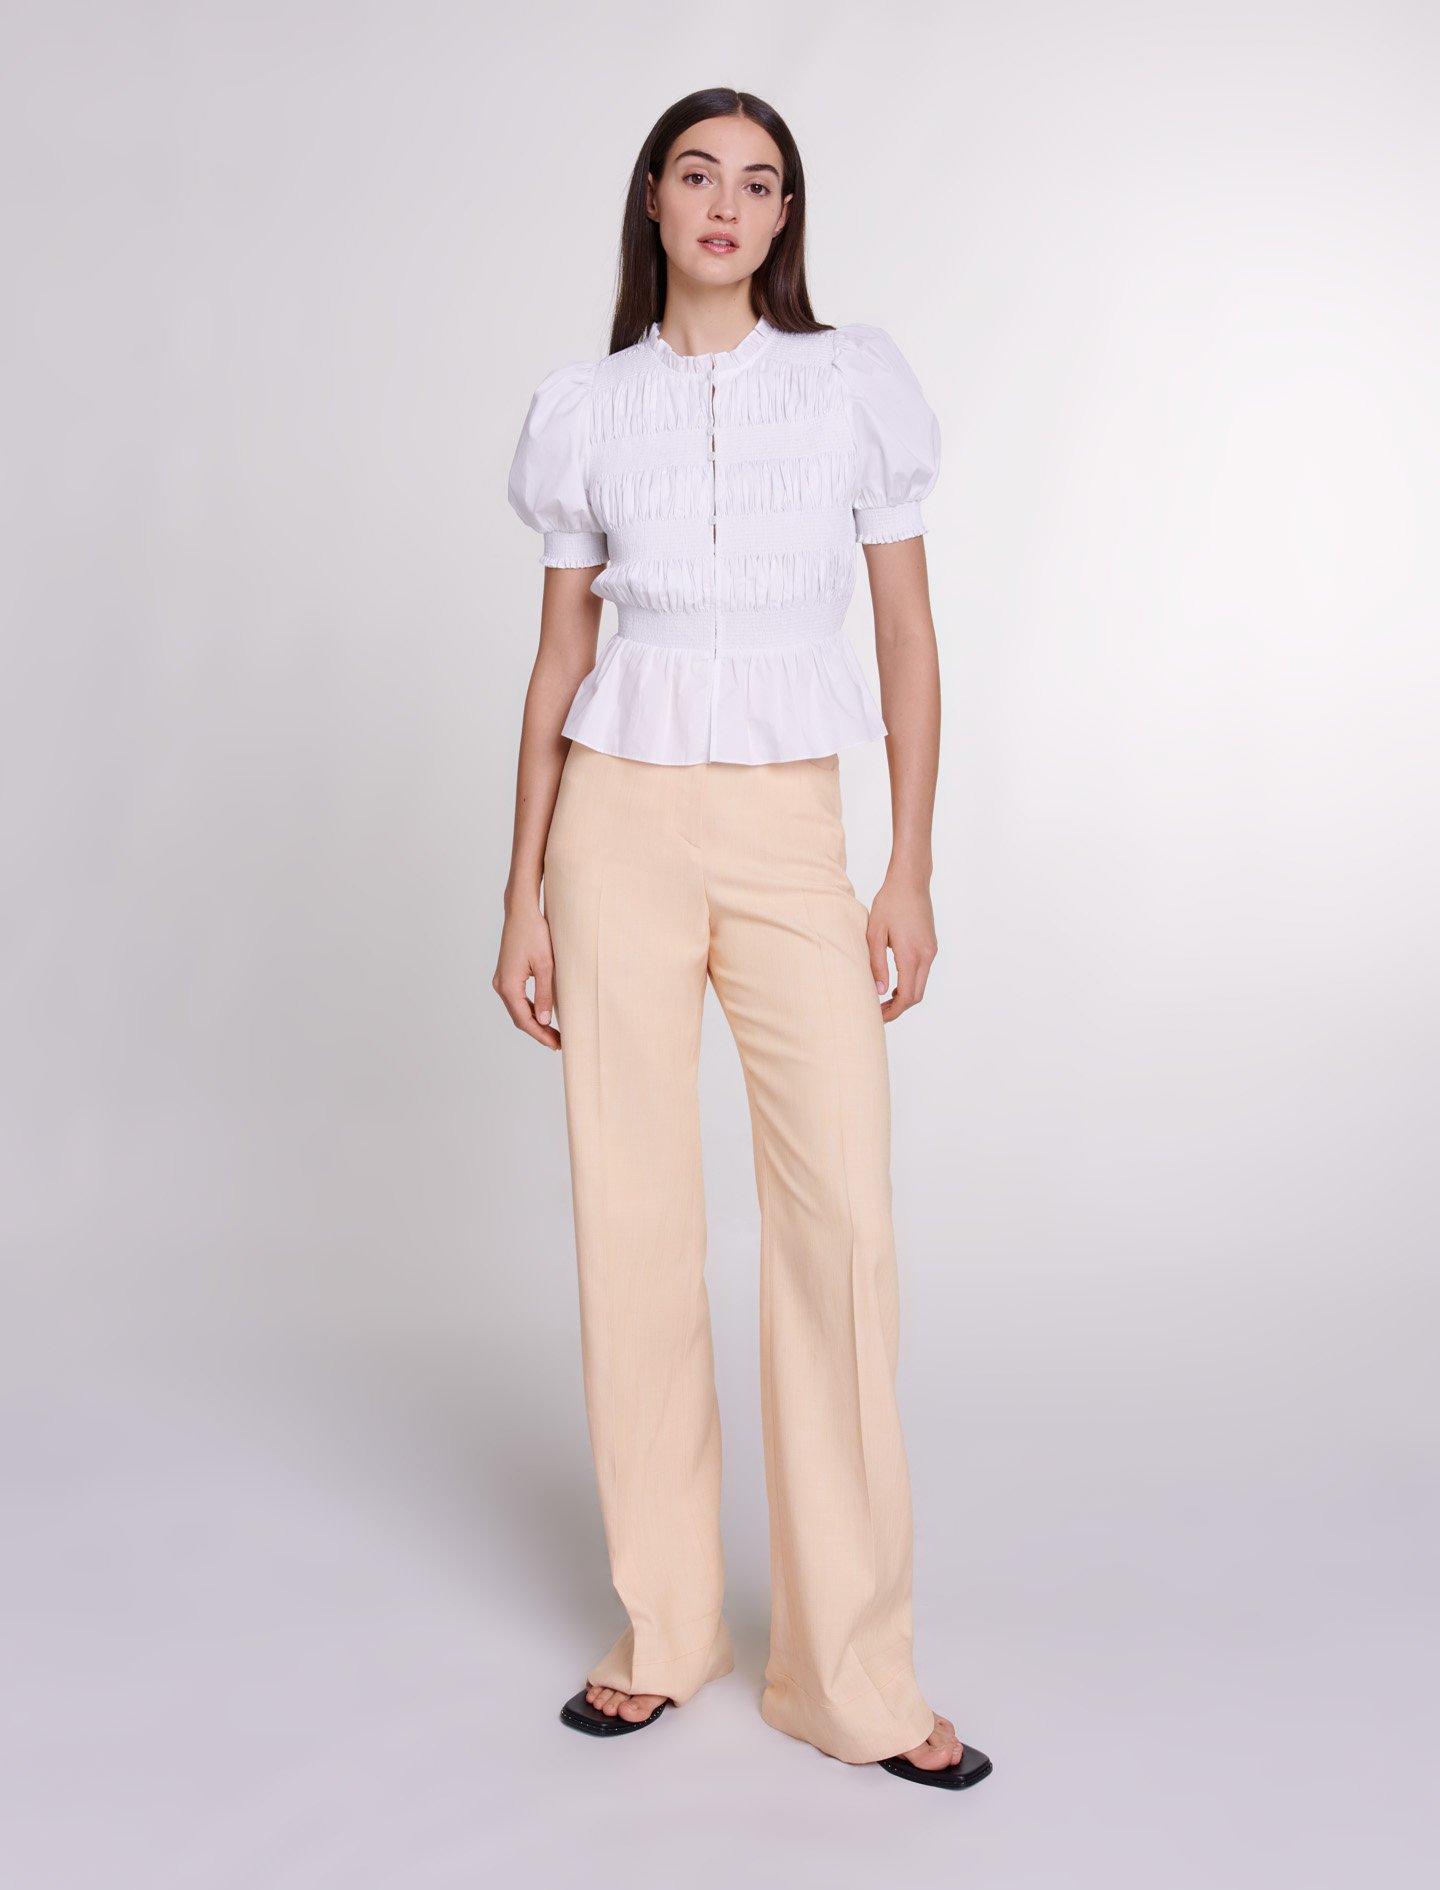 Maje Woman's viscose, Suit trousers for Spring/Summer, in color Yellow banana /